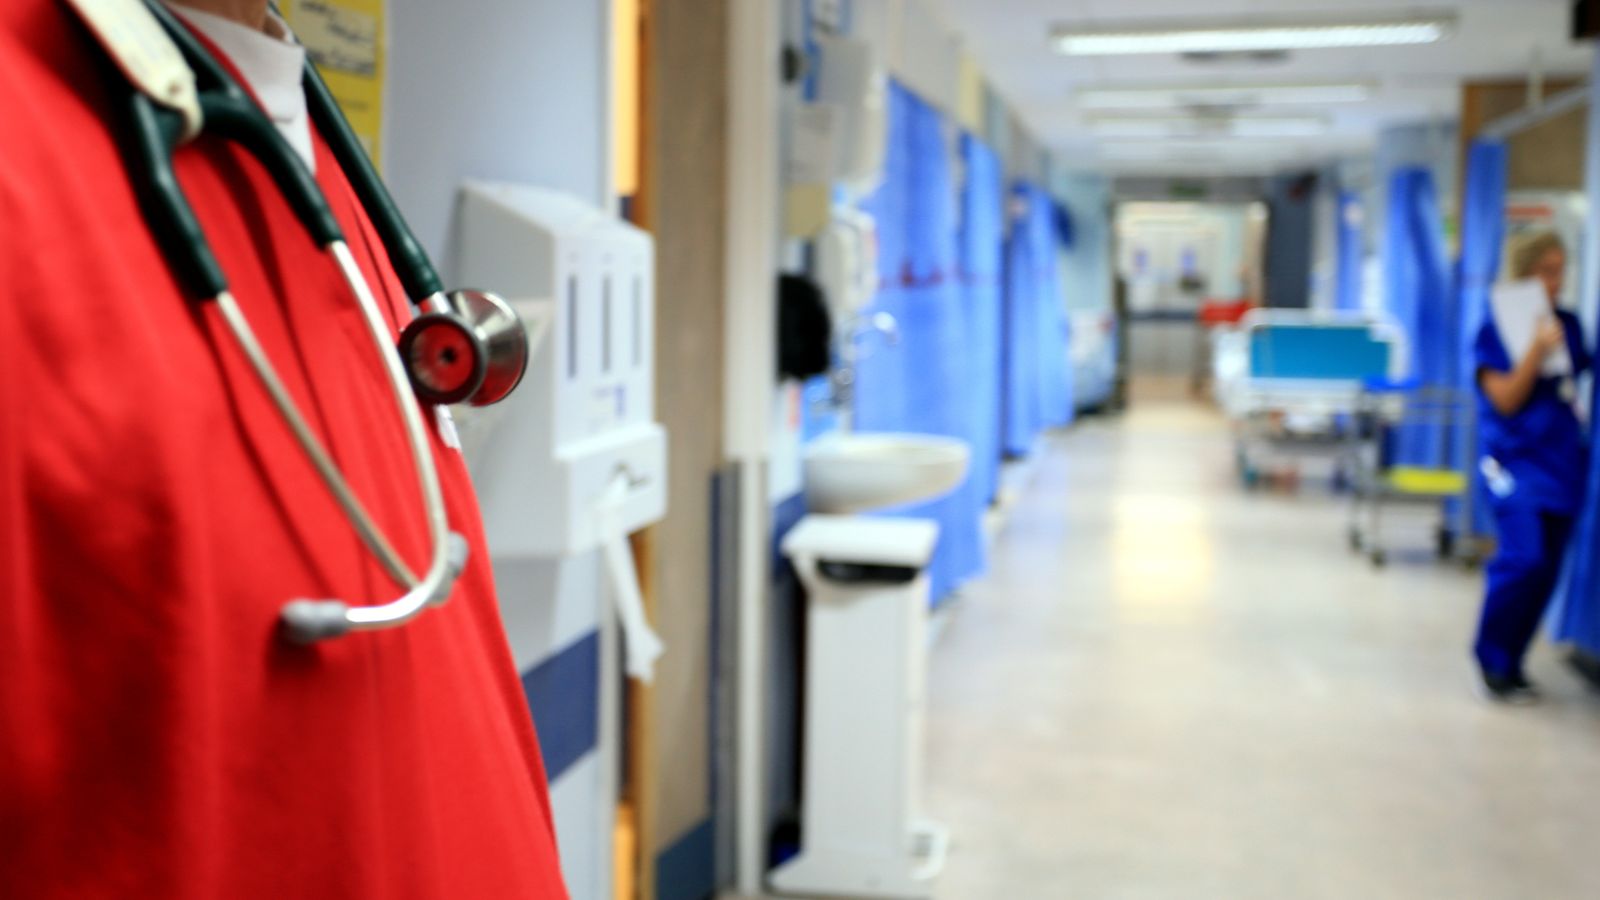 Labour pledges to clear backlog of patients waiting over 18 weeks within five years 